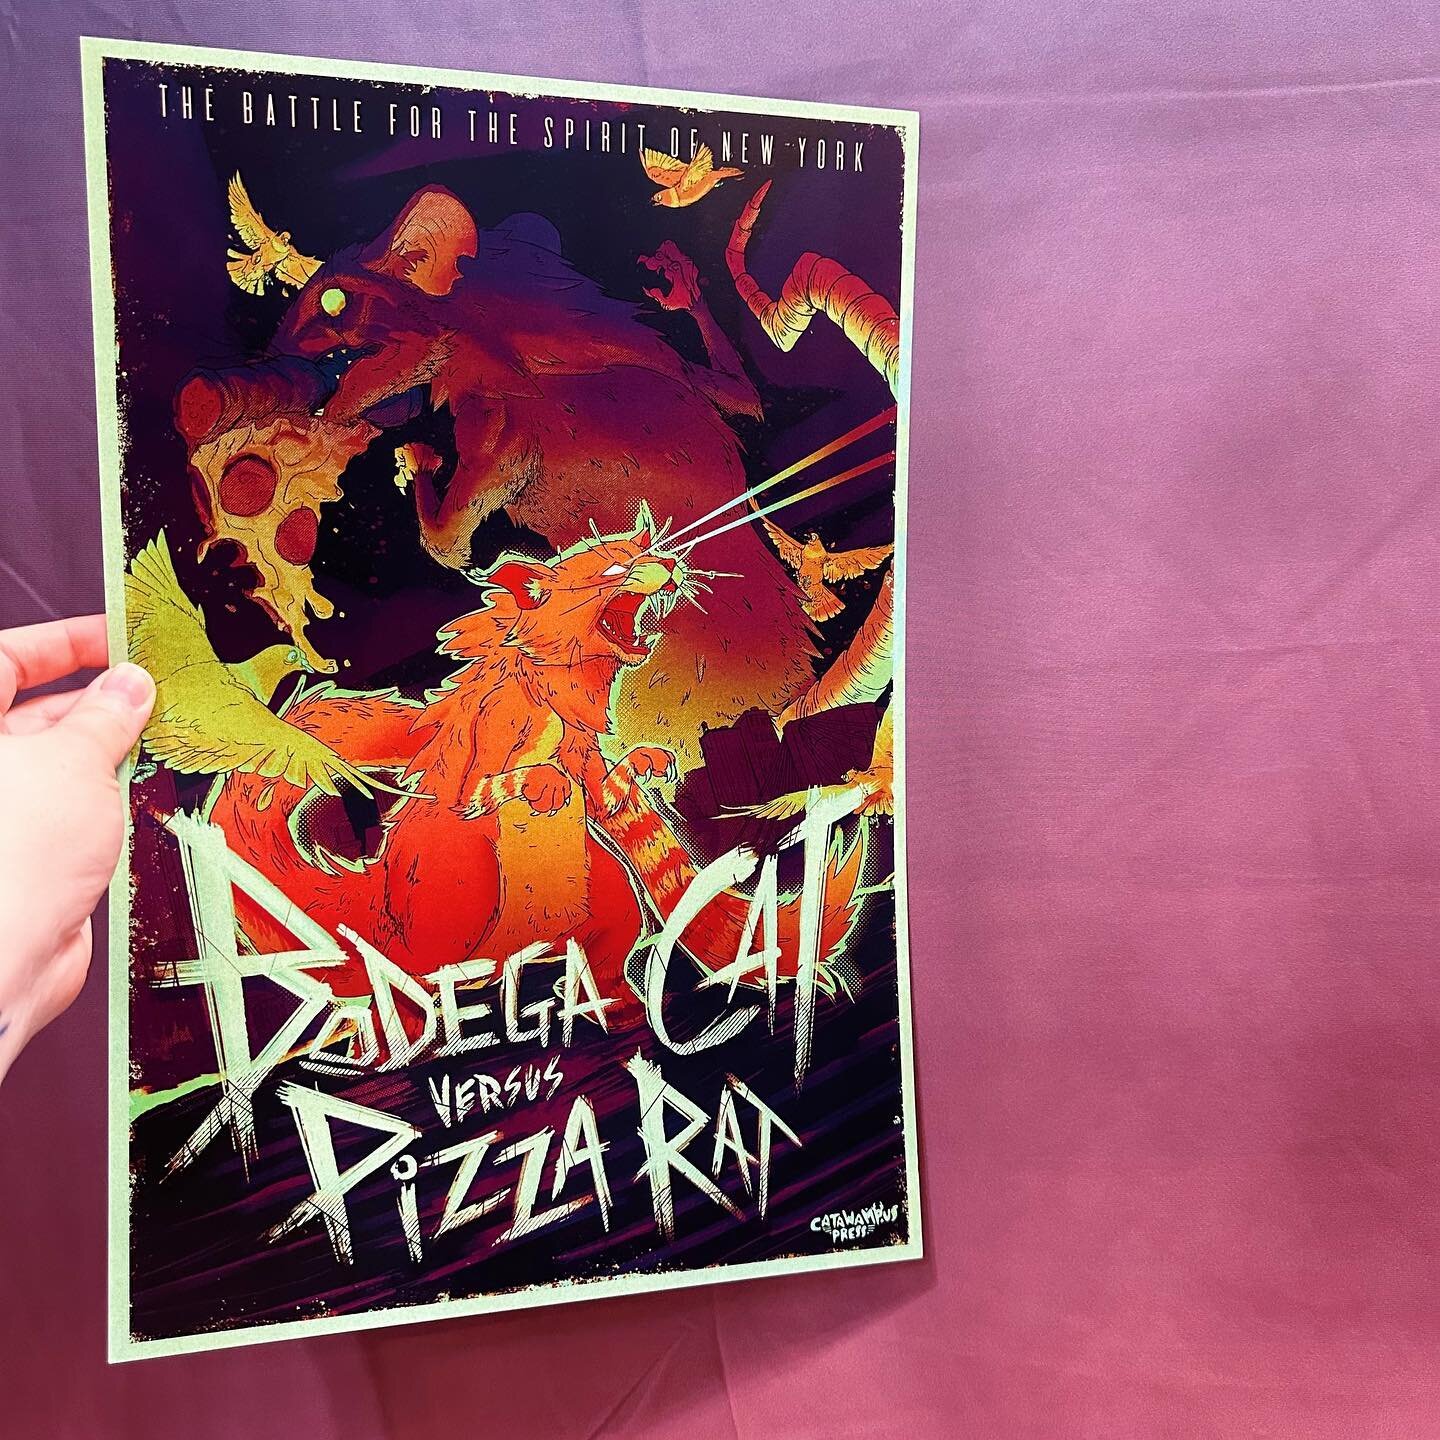 Witness the battle of New York&rsquo;s very own kaiju in the sci-fi epic BODEGA CAT vs. PIZZA RAT 🍕🐈&zwj;⬛ our 2023 NYCC exclusive poster is up for grabs at booth 4357 #mymoneyisonthecat